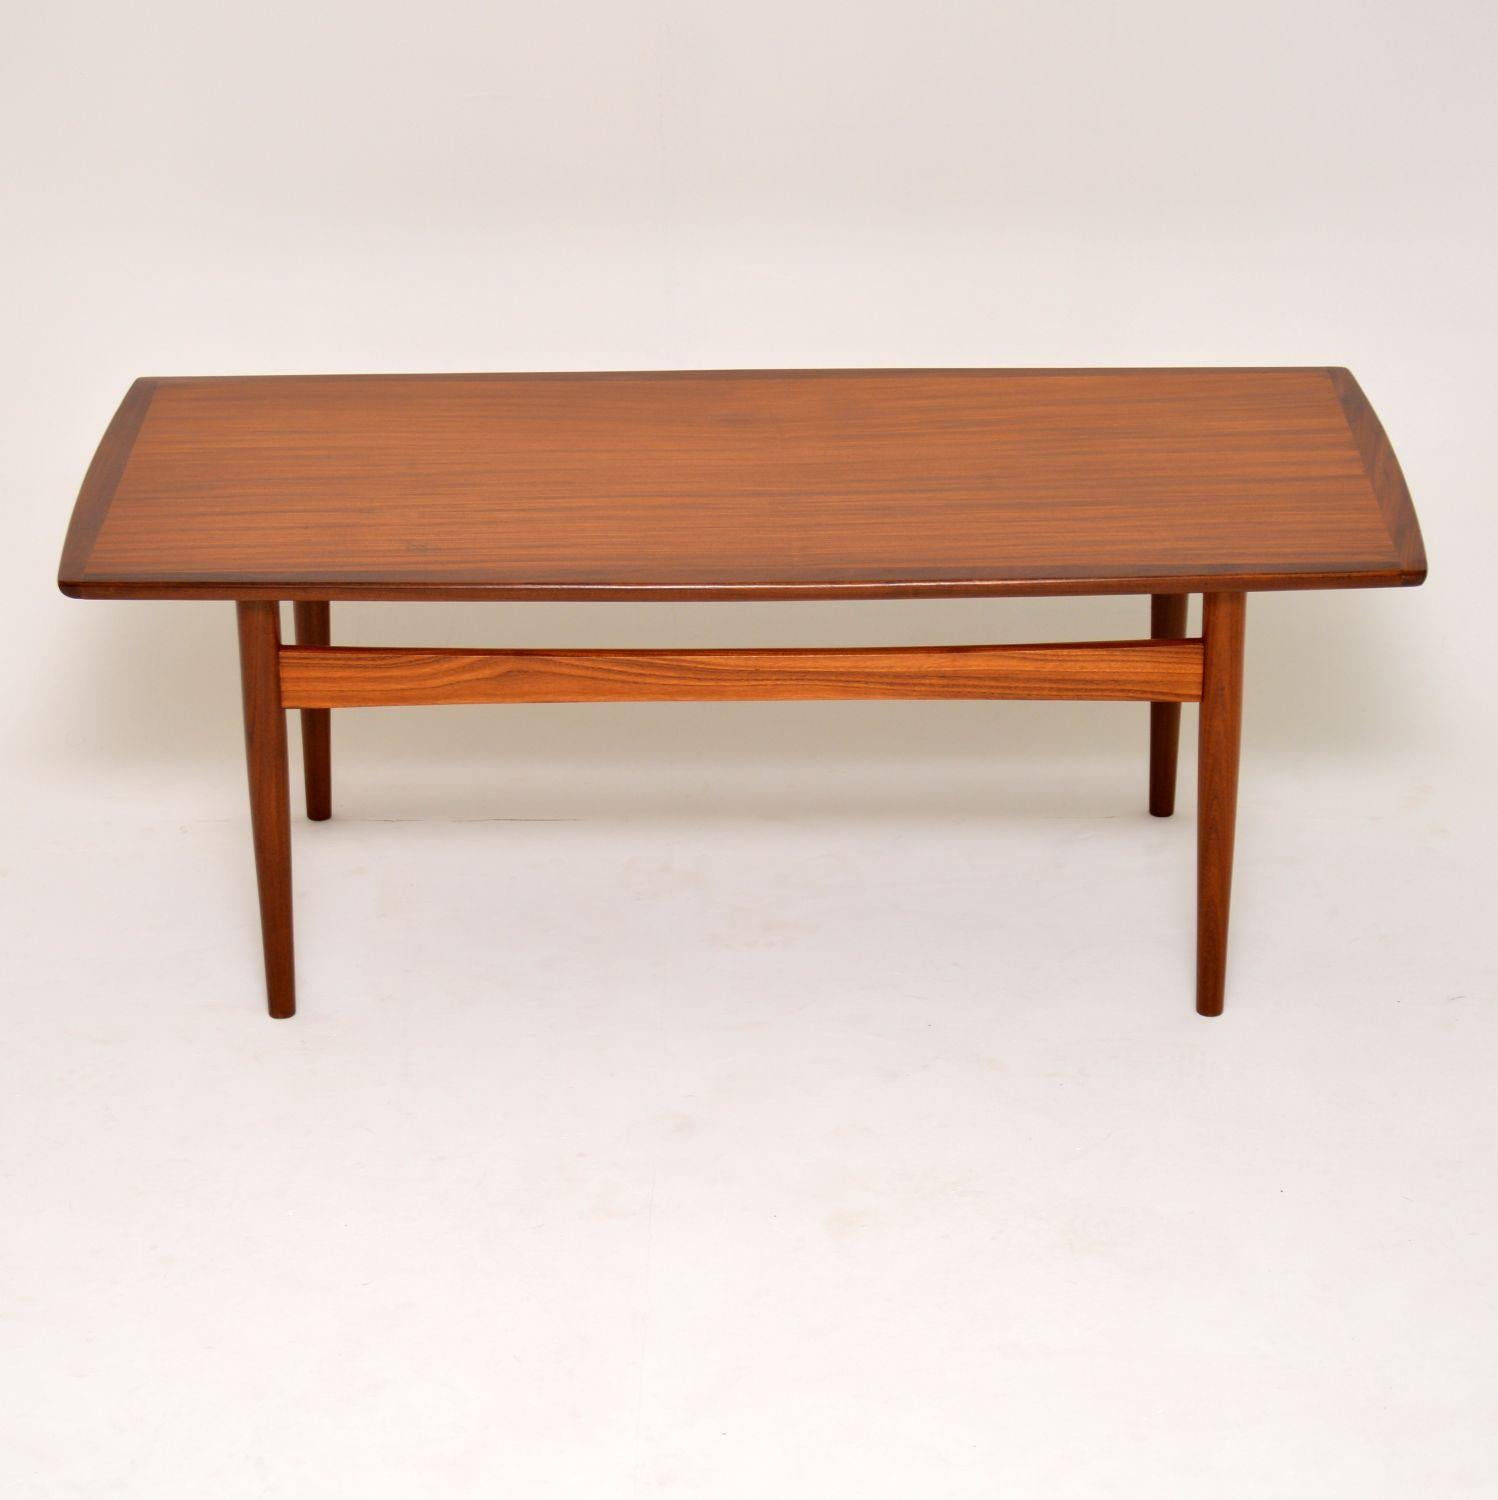 A stylish and very well made vintage coffee table in teak, this was made in Denmark and dates from the 1960s. We have had this stripped and re-polished to a very high standard, the condition is superb throughout.

Measures: Width – 118 cm, 47